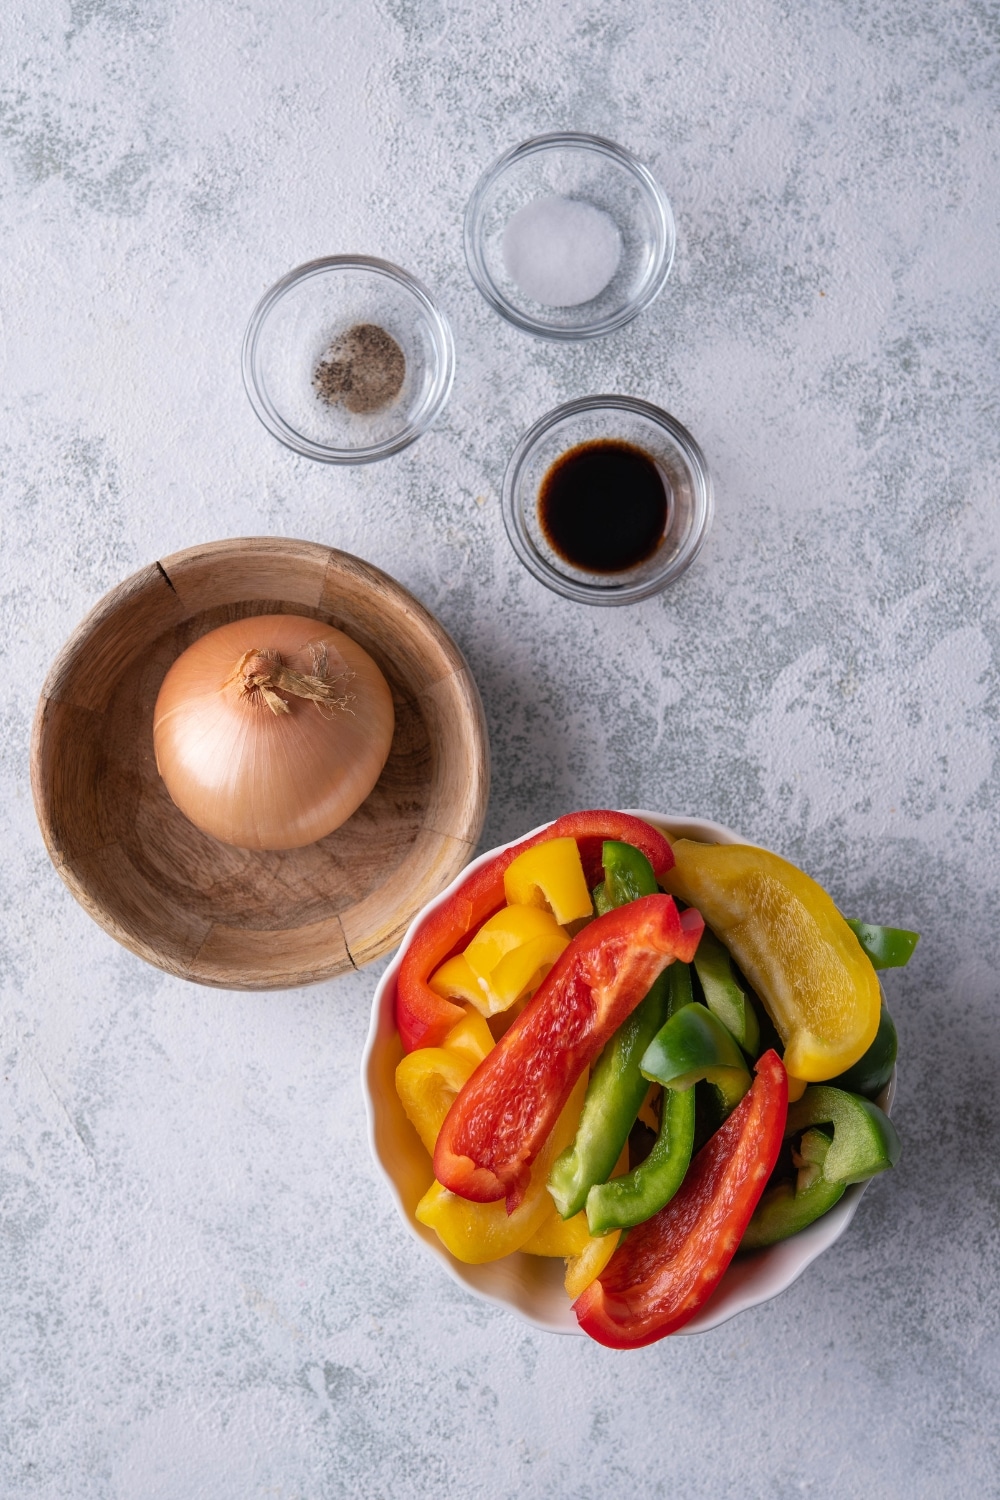 A white bowl of sliced red, green, and yellow bell peppers, a whole onion in a medium wooden bowl, and small glass bowls of salt, pepper, and balsamic vinegar.